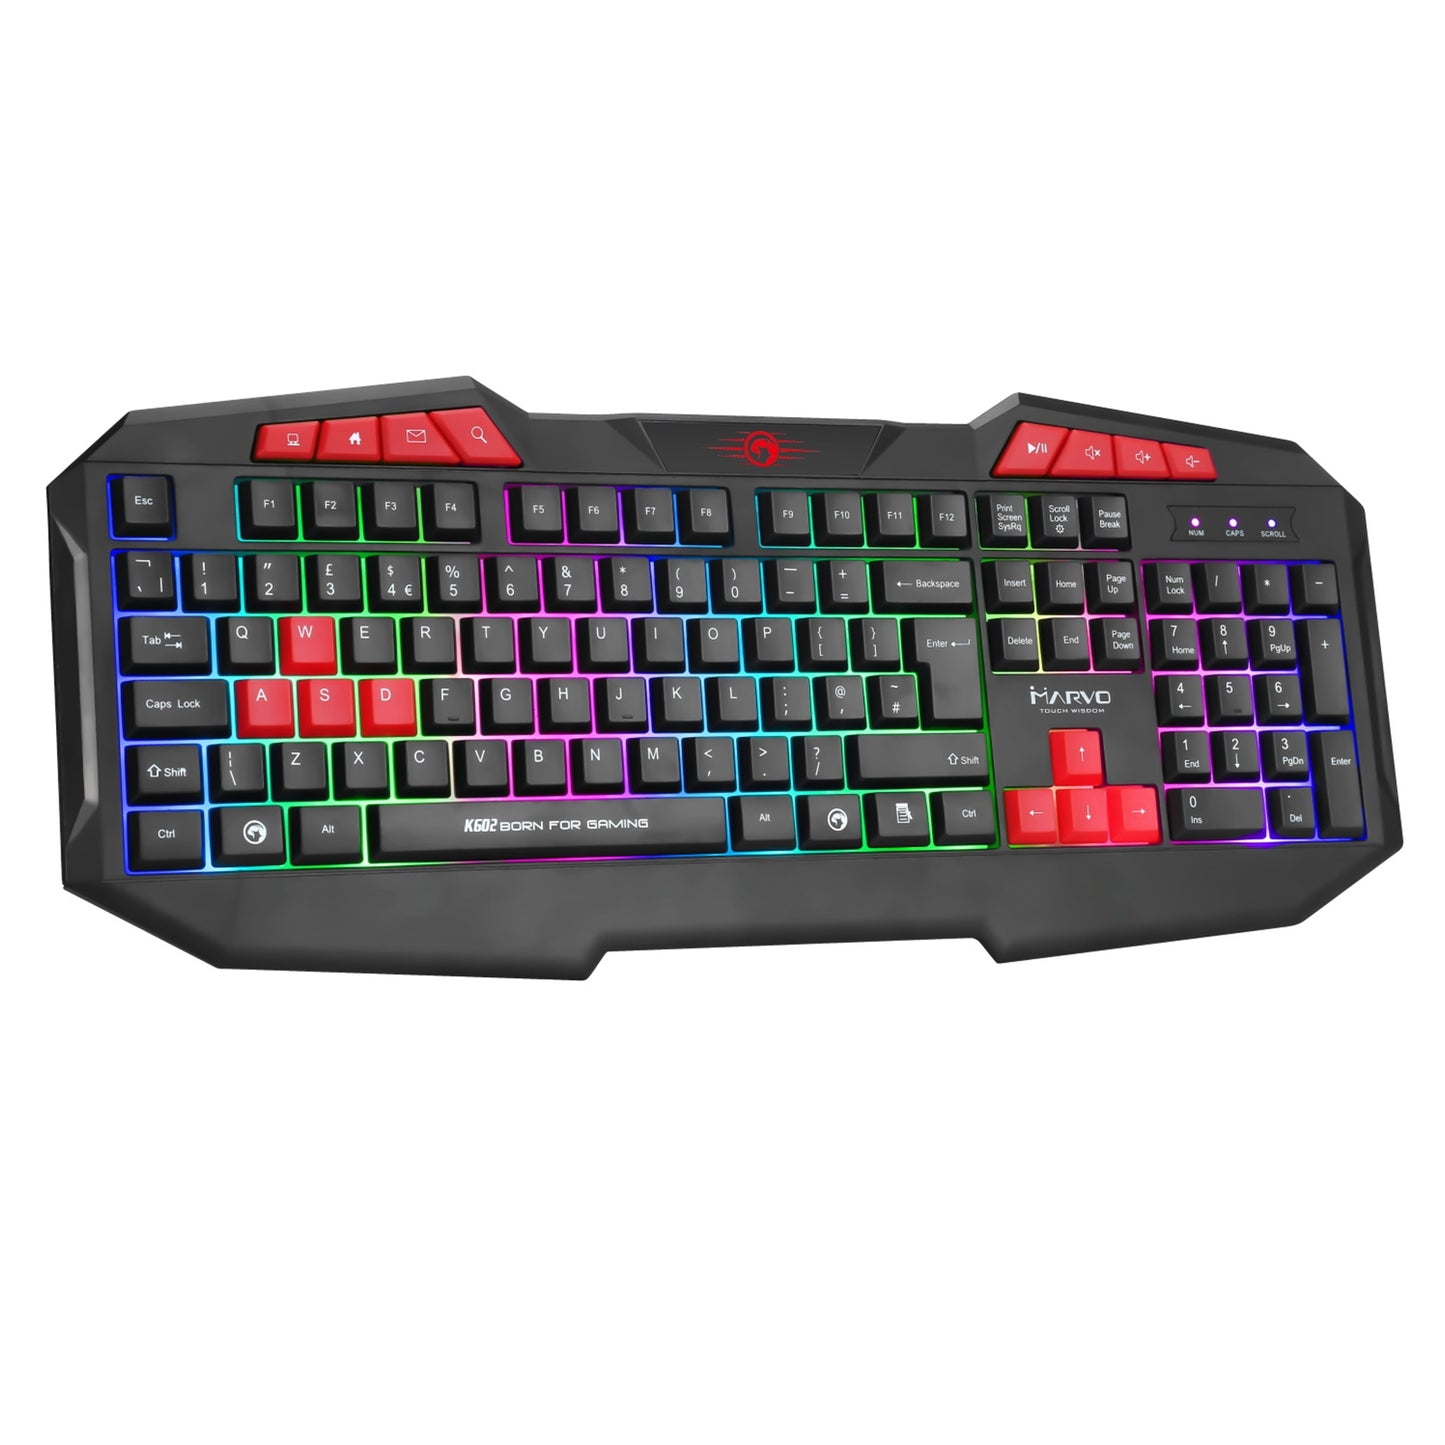 Marvo Scorpion 4-in-1 Gaming Bundle, Wired Keyboard, Mouse, Headset and Mouse Pad, 7 Colour LED, Non-slip Mouse Pad and Stereo Headset